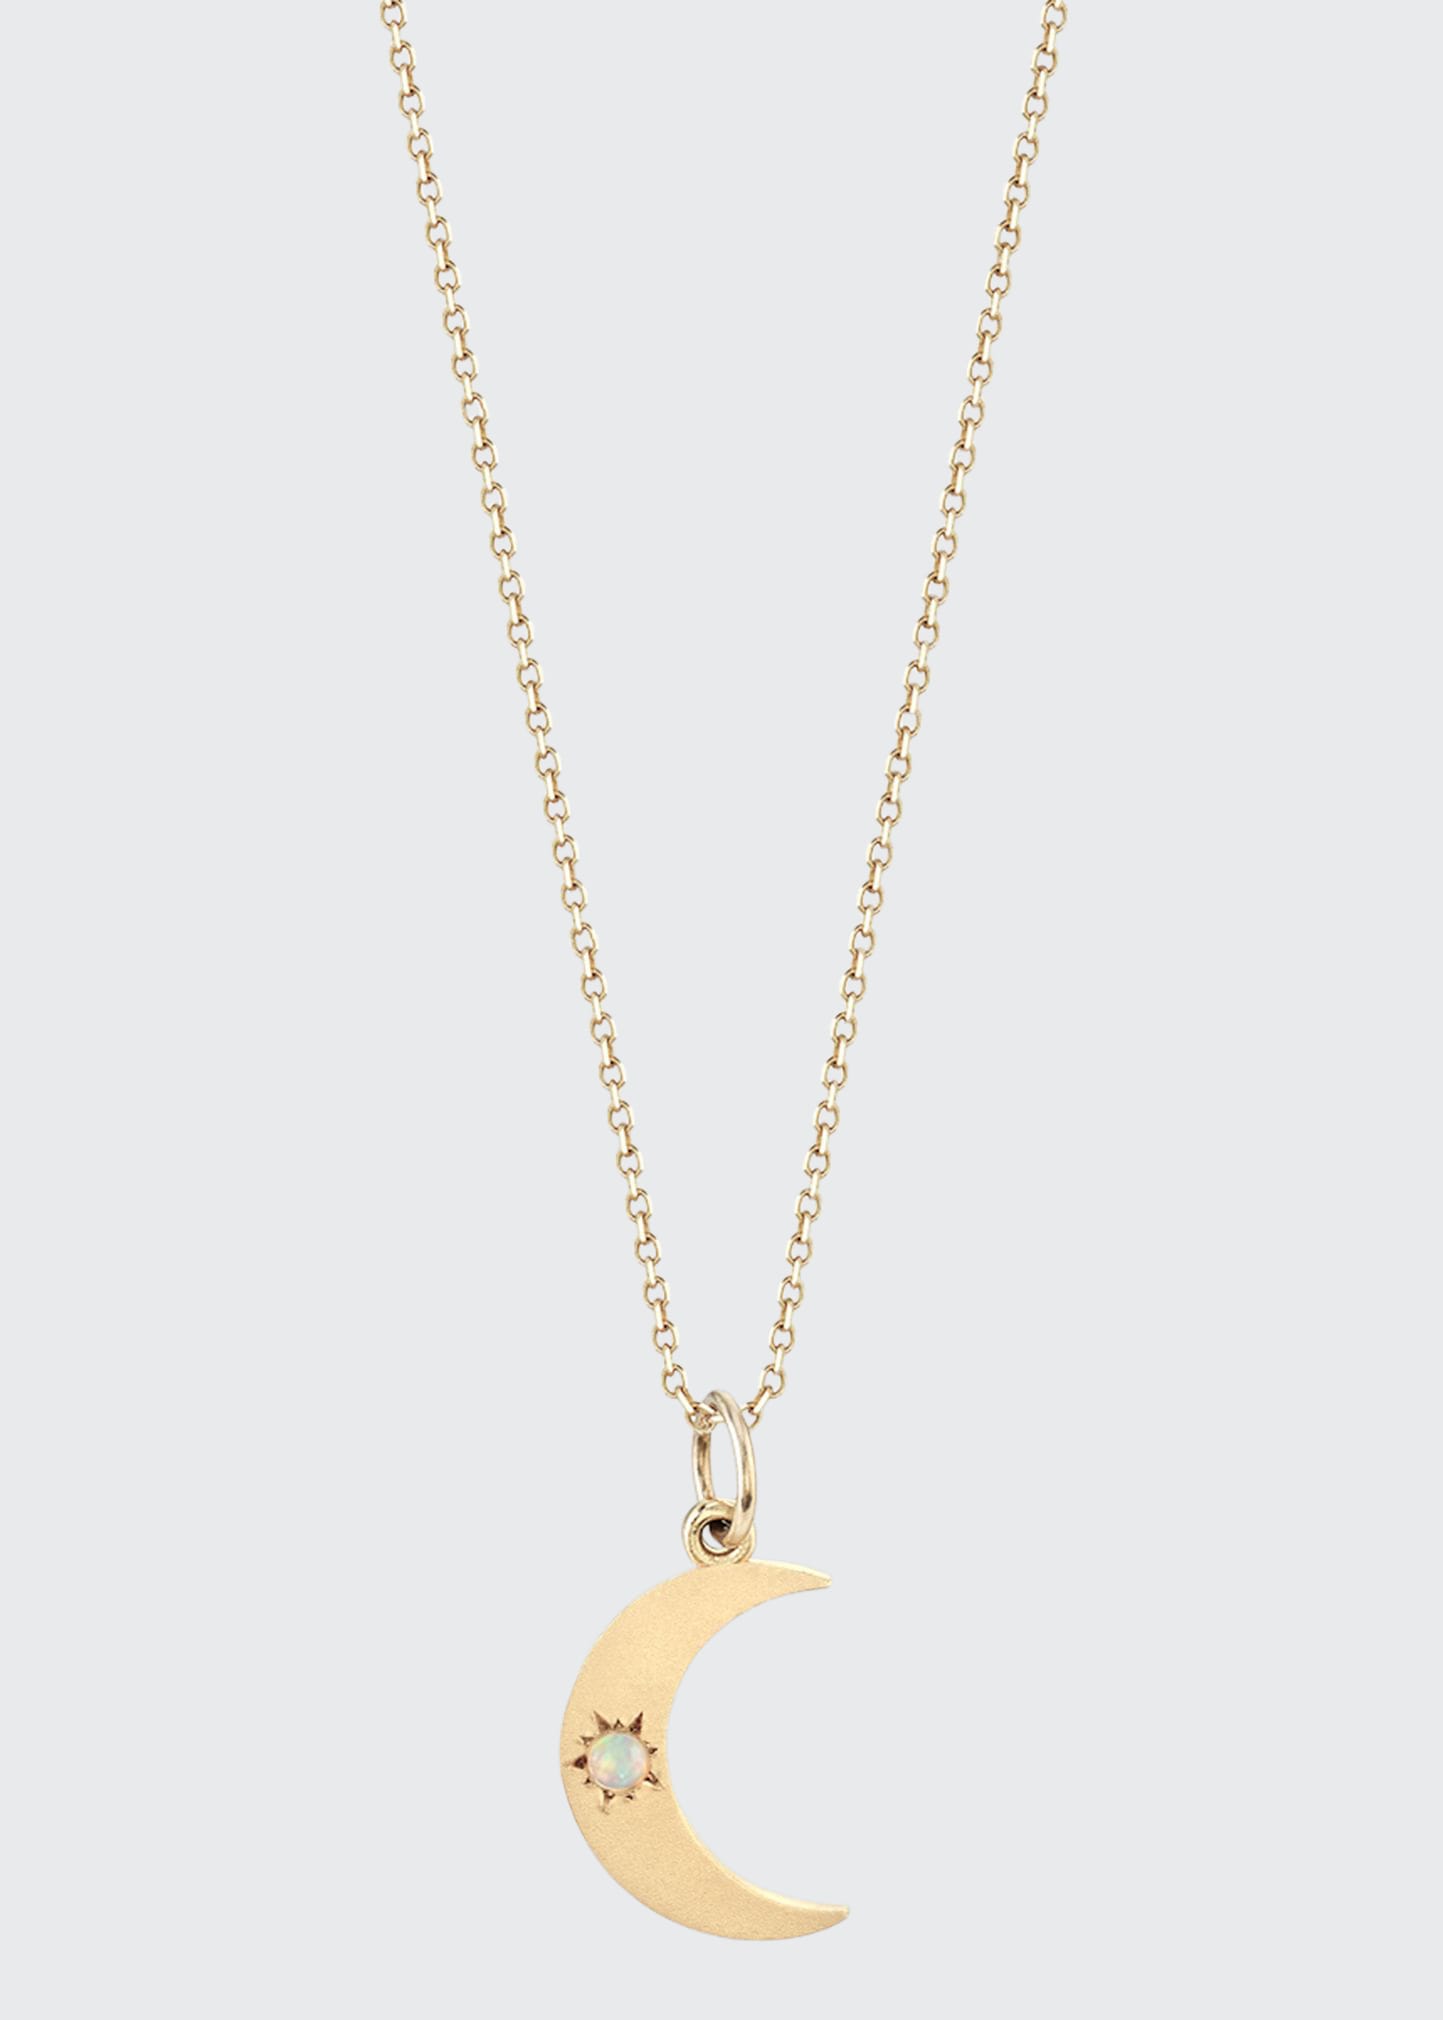 Andrea Fohrman Crescent Moon Phase Necklace With Opal Center